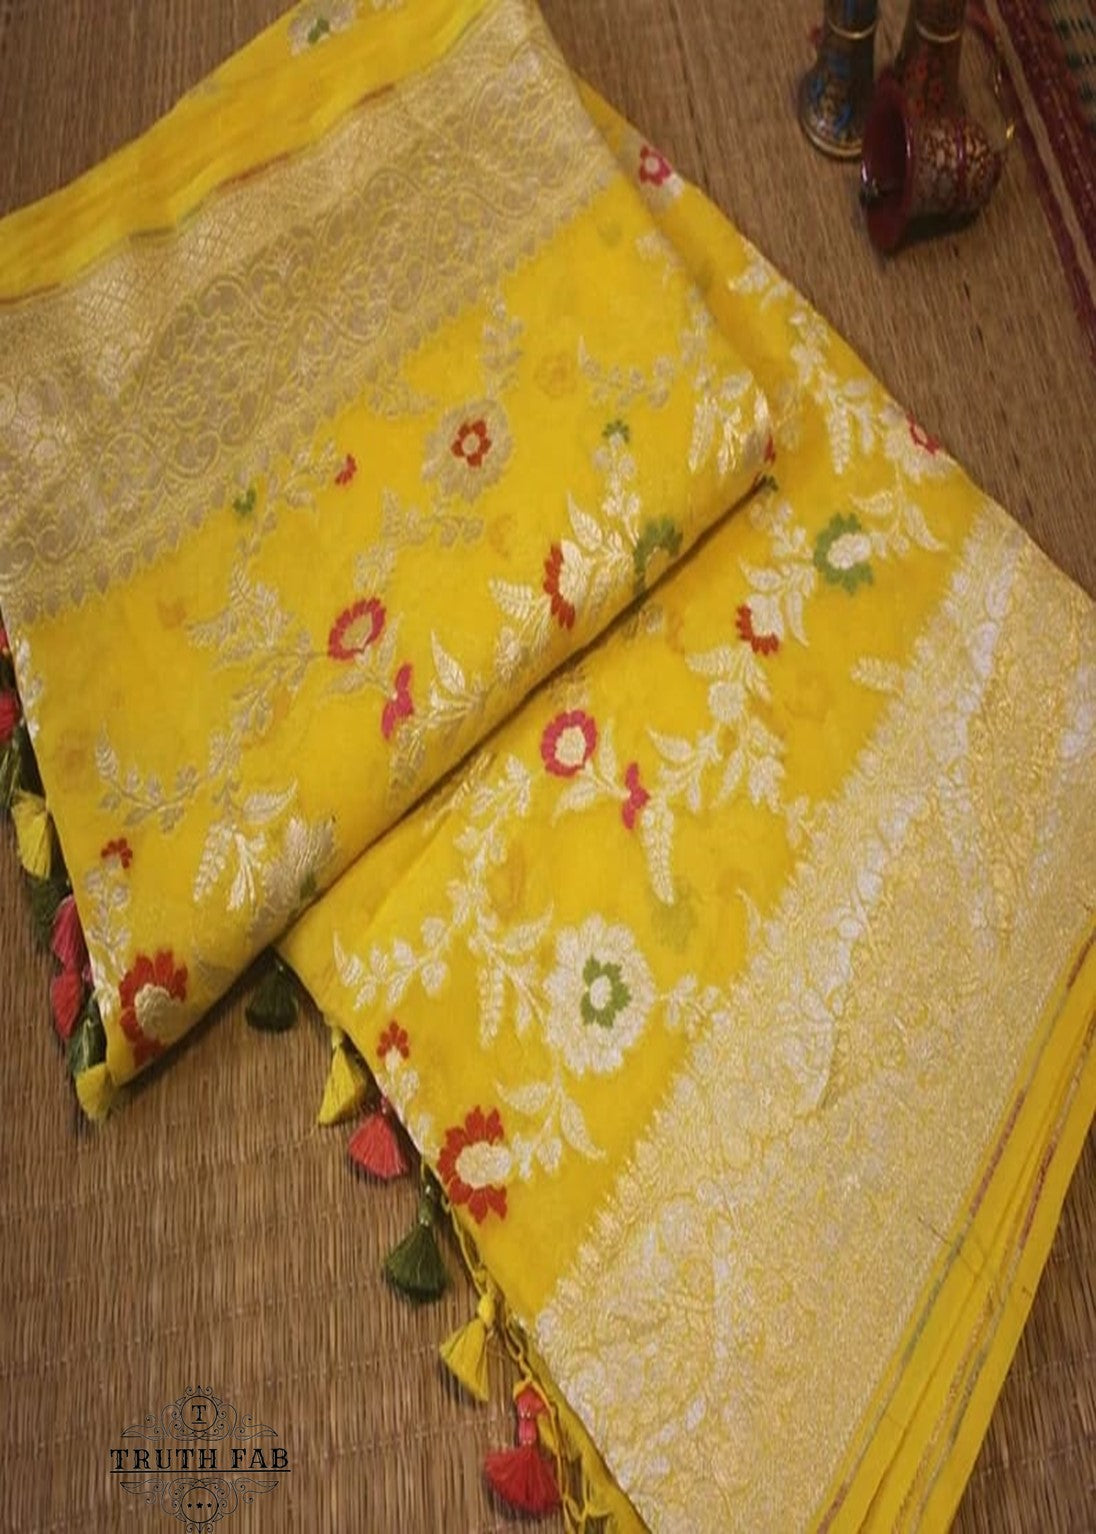 Georgette khaddi saree in sun flower yellow colour. Saree has a delicate water zari border with Gorgeous unique Motifs near pallu. The entire saree is beautiful with water zari meenakari design. It is an elegant traditional Banarasi saree. Irresistible wedding collection. This Mesmerising Saree is a Combination of Elegance and Style.